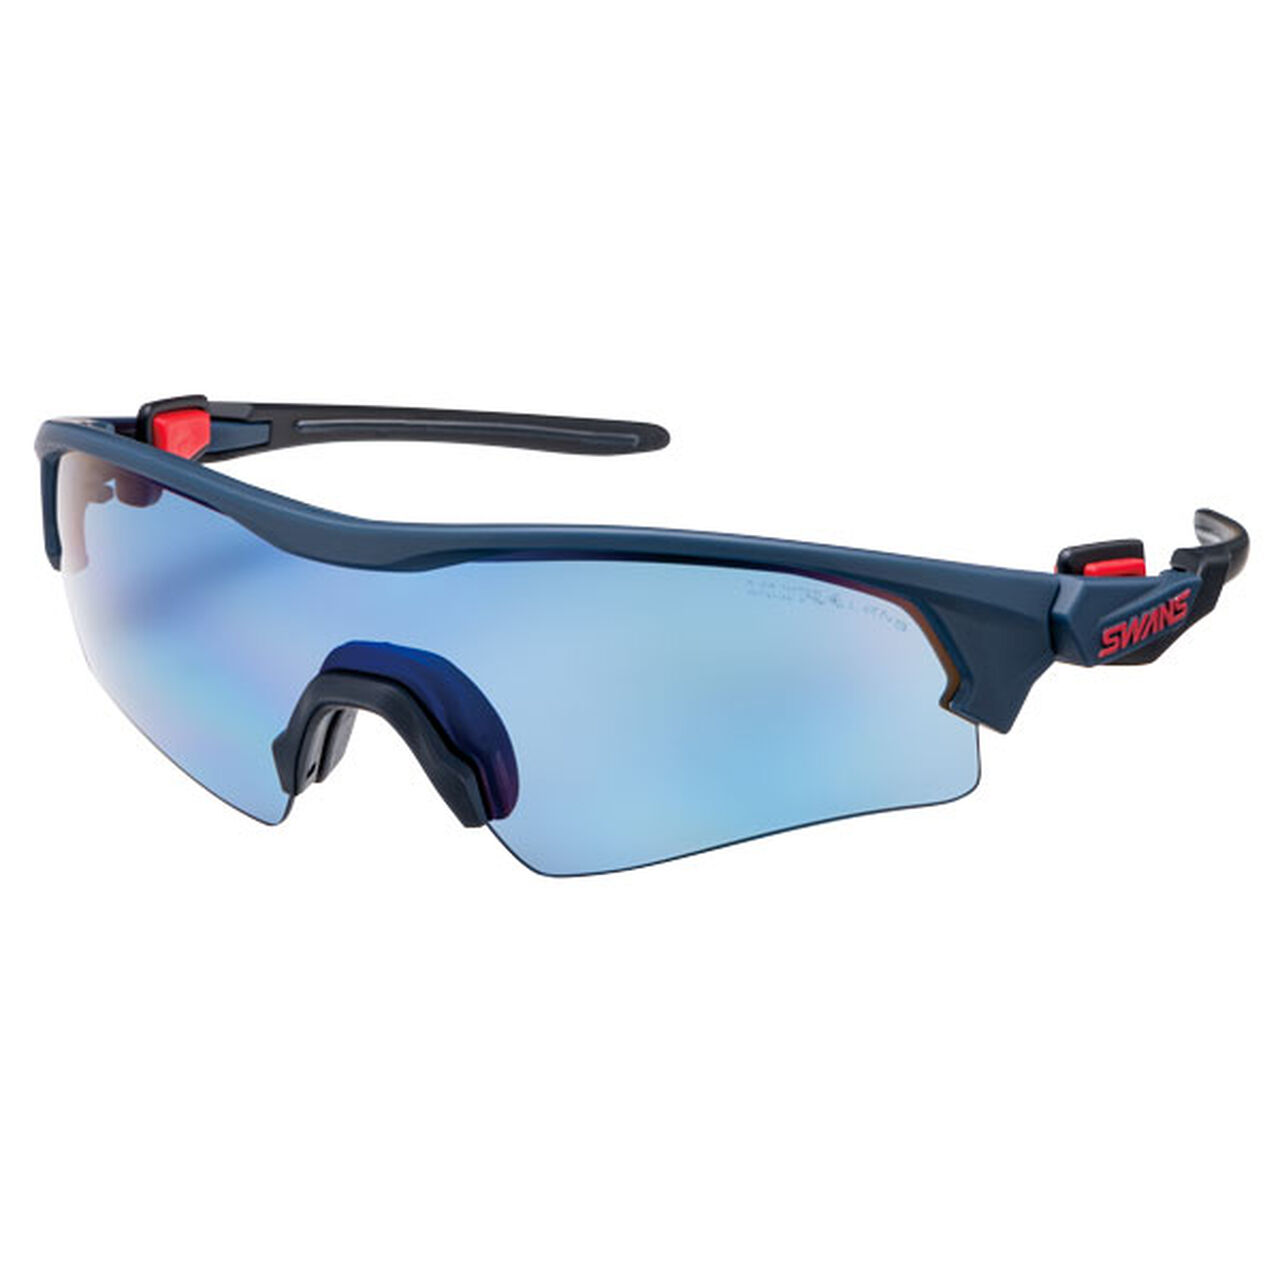 FACEONE 0167 DNAV Polarized ULTRA Ice blue,Opt10, large image number 0